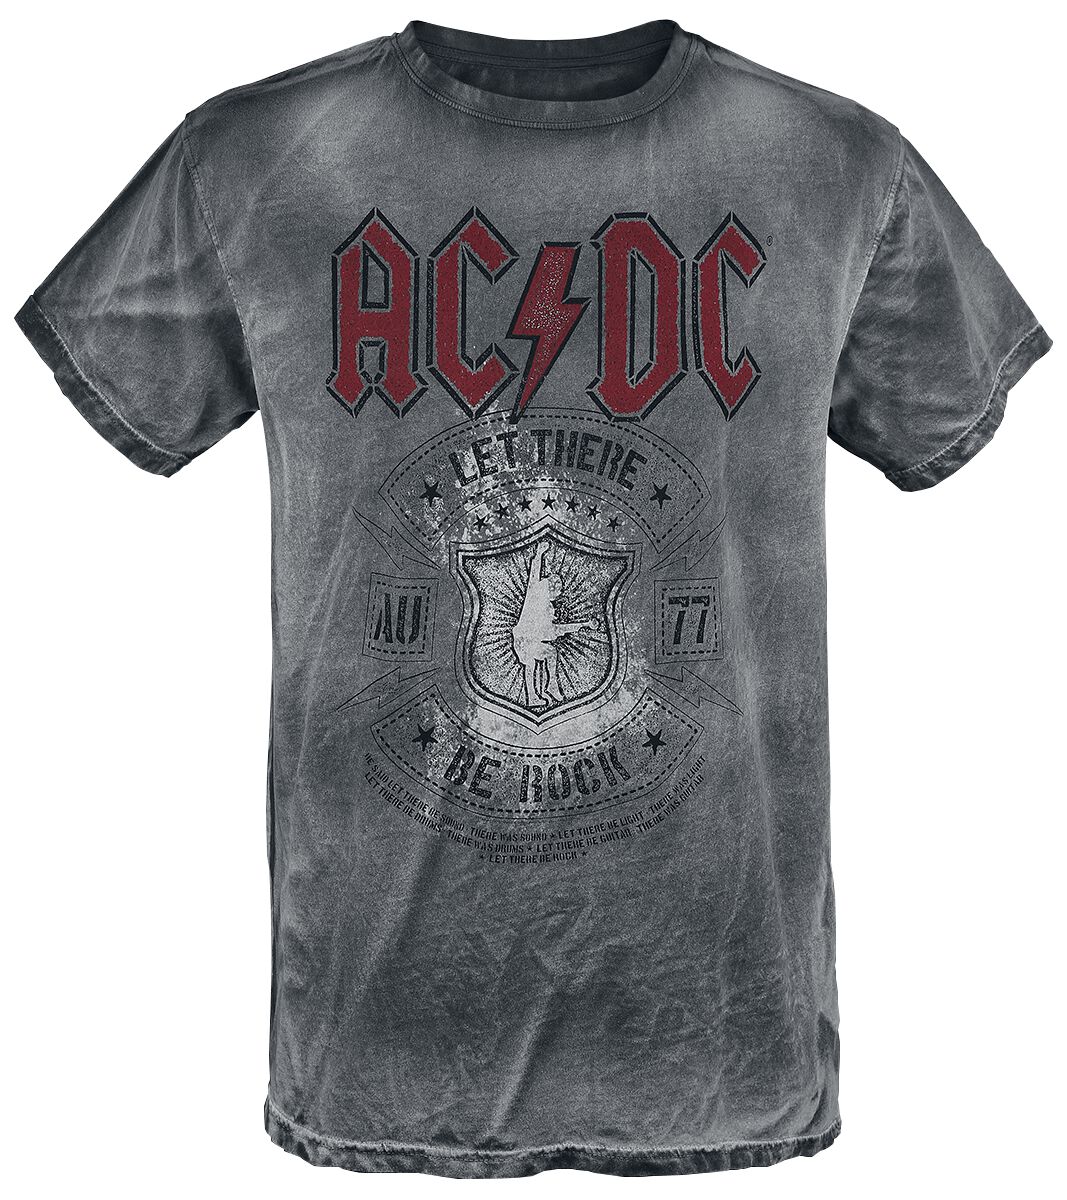 AC/DC Let There Be Rock T-Shirt grau in 3XL